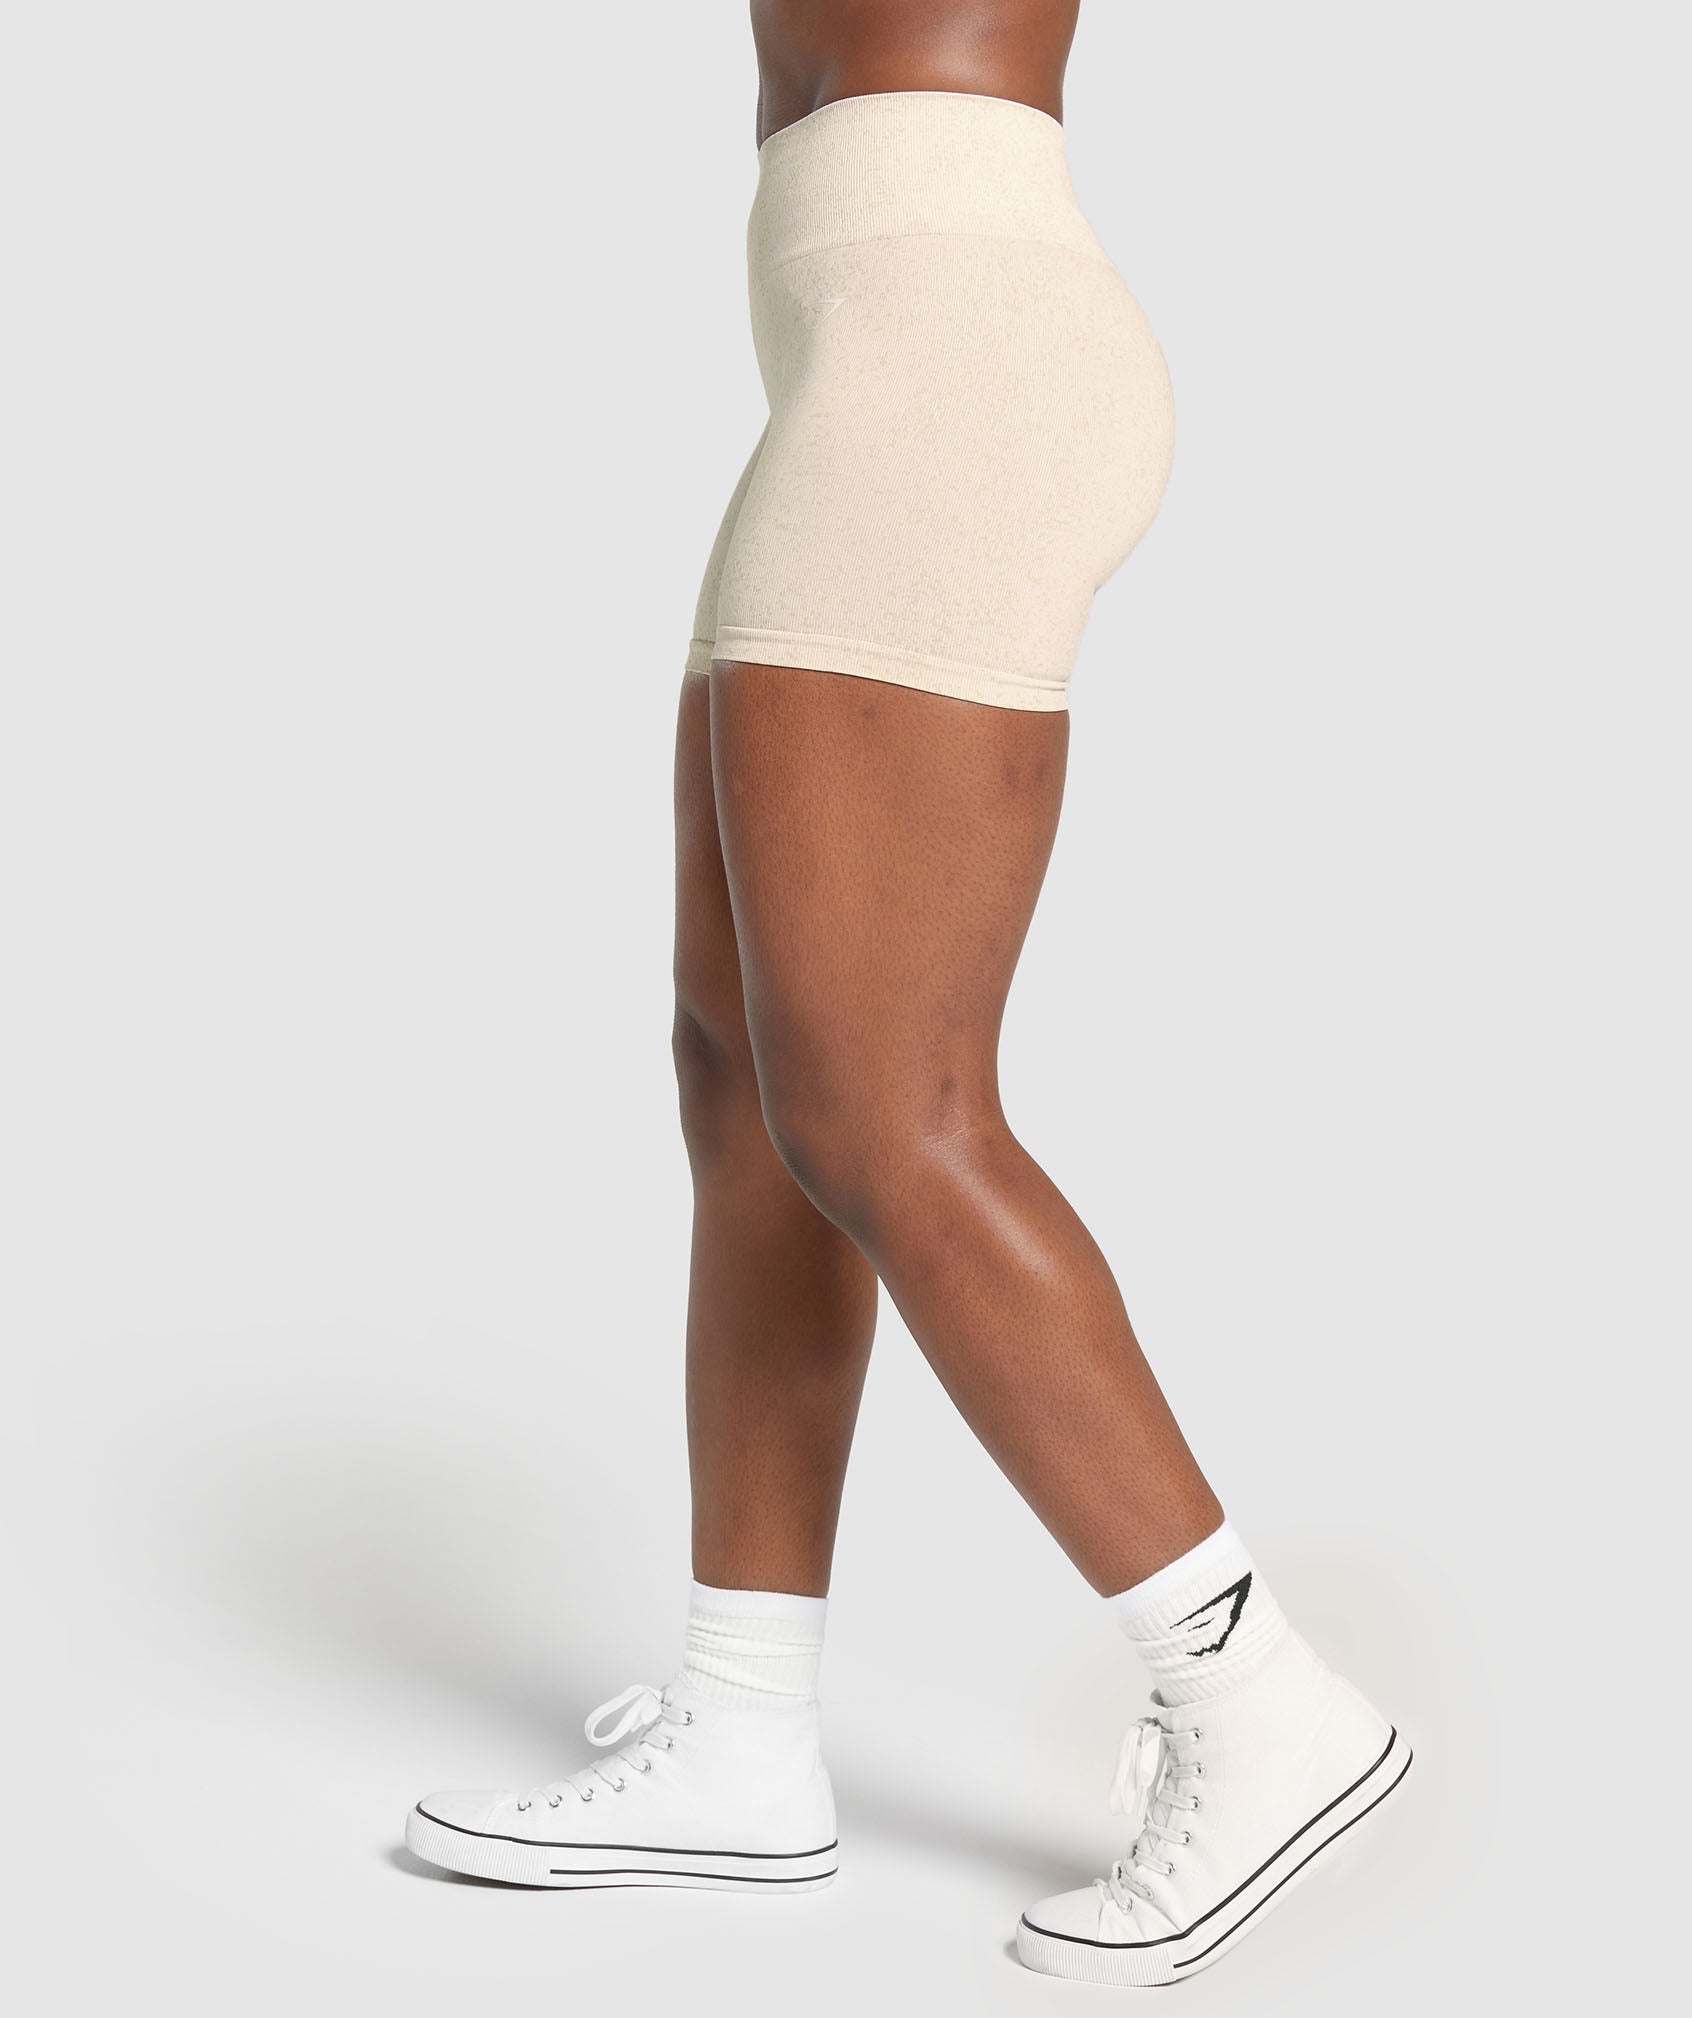 Adapt Fleck Seamless Shorts in Coconut White - view 3